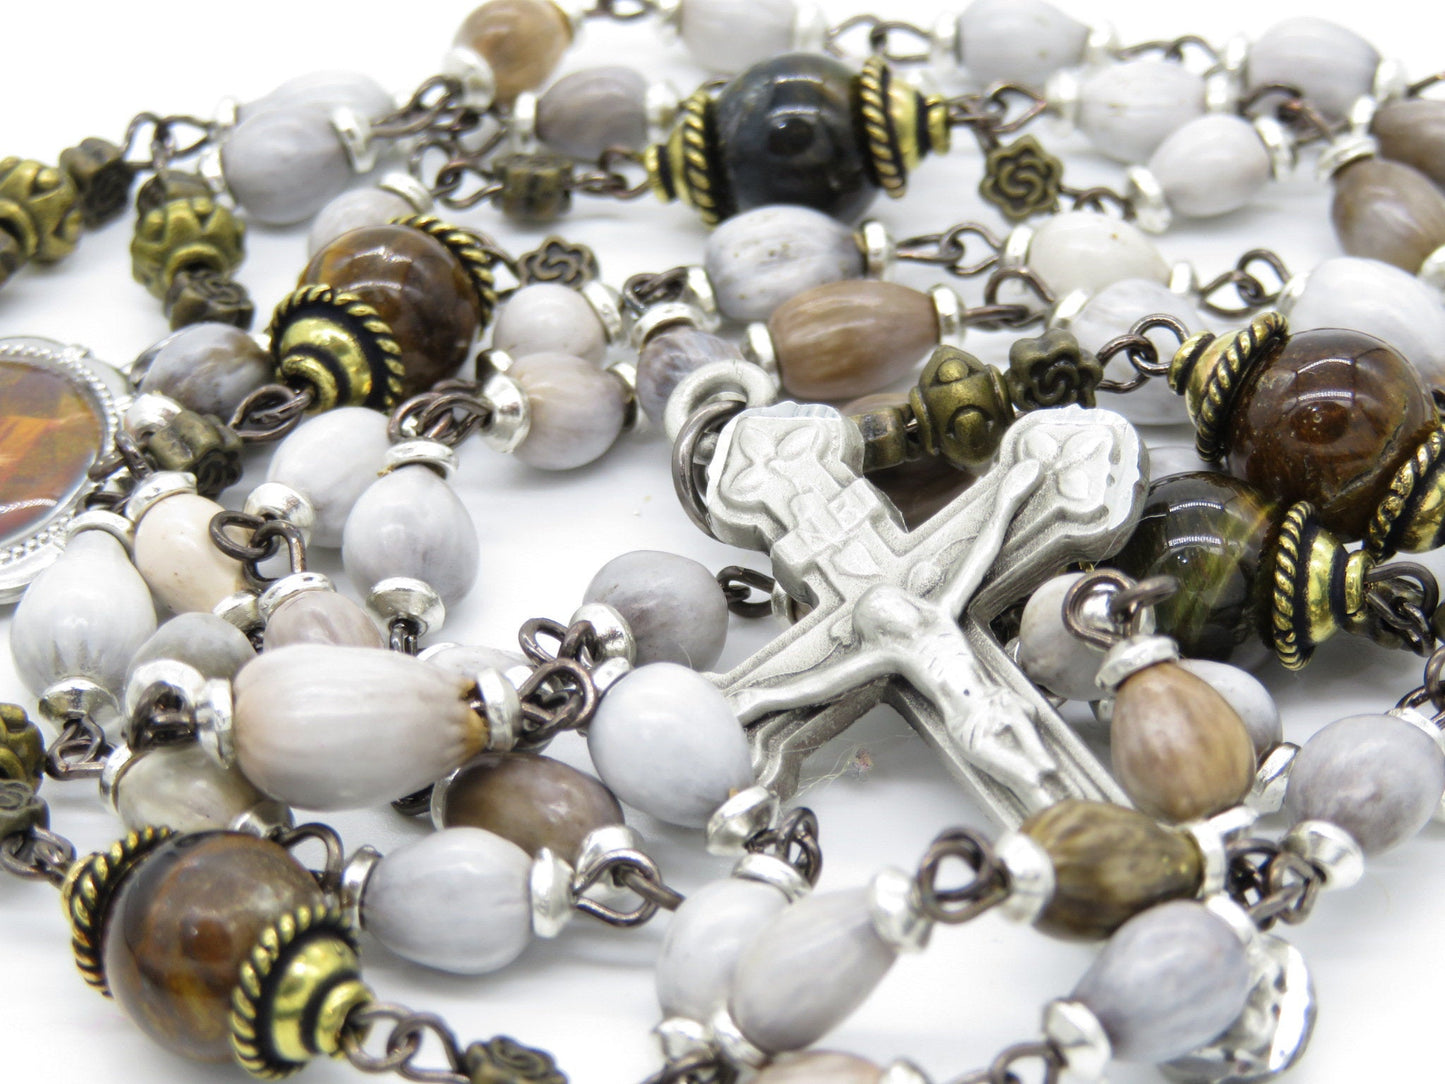 Saint Mary Magdalene Handcrafted Job's tear's Rosary beads, Tigers eye Gemstone Rosaries, Pewter Crucifix, Prayer beads,